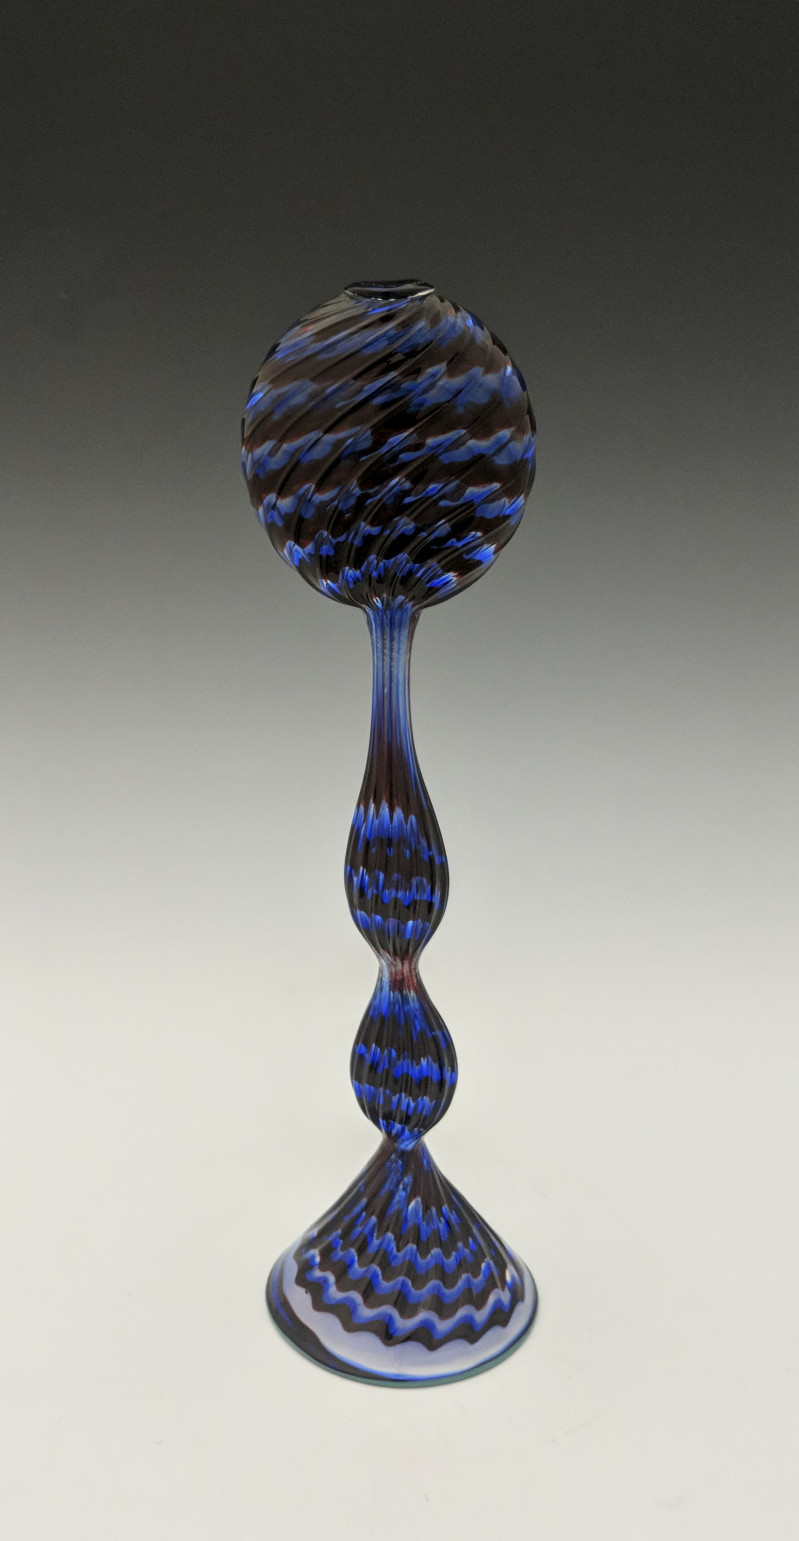 Dale Chihuly - Single form #1